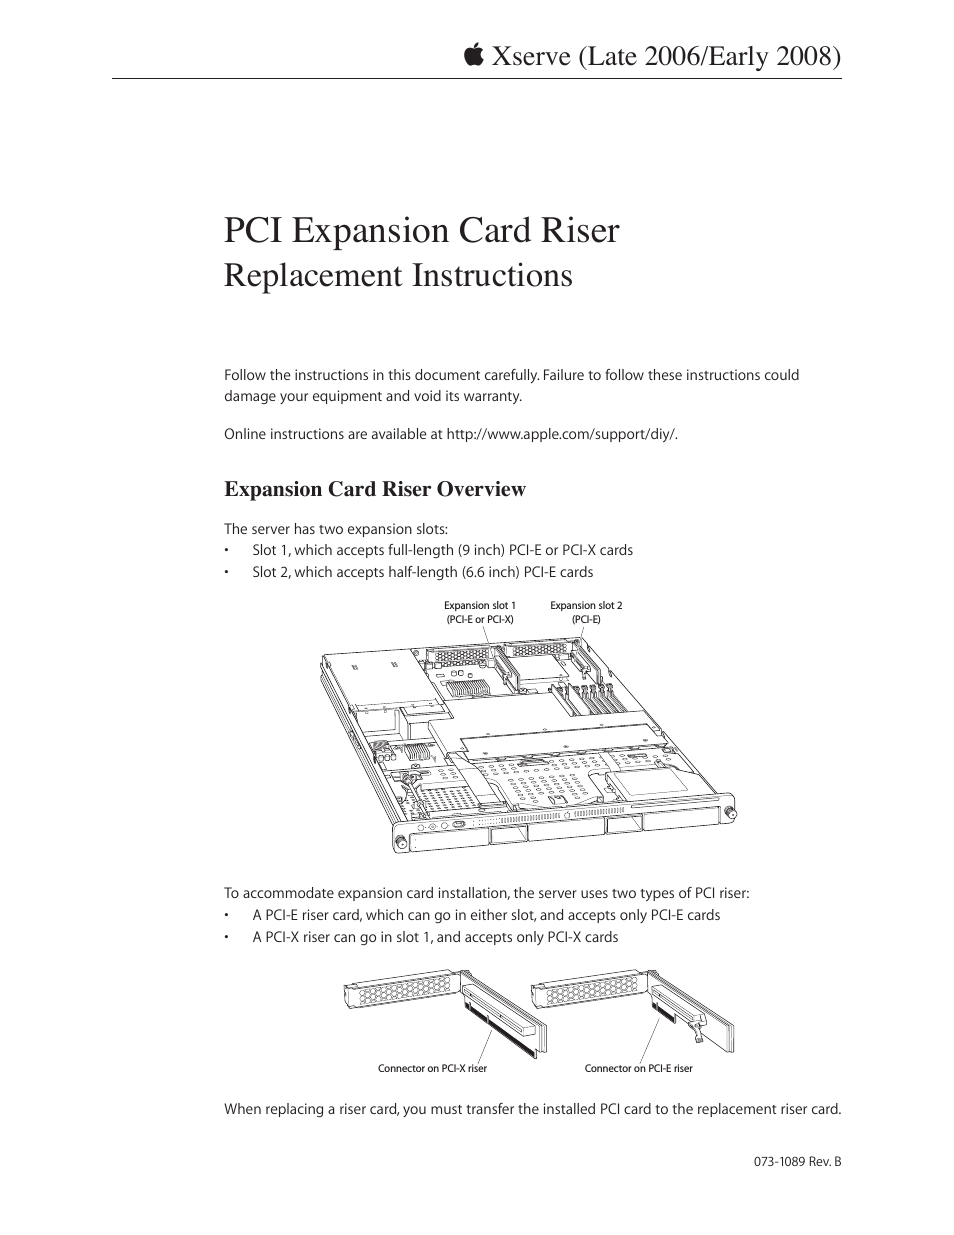 Xserve (Early 2008) DIY Procedure for Expansion Card Riser